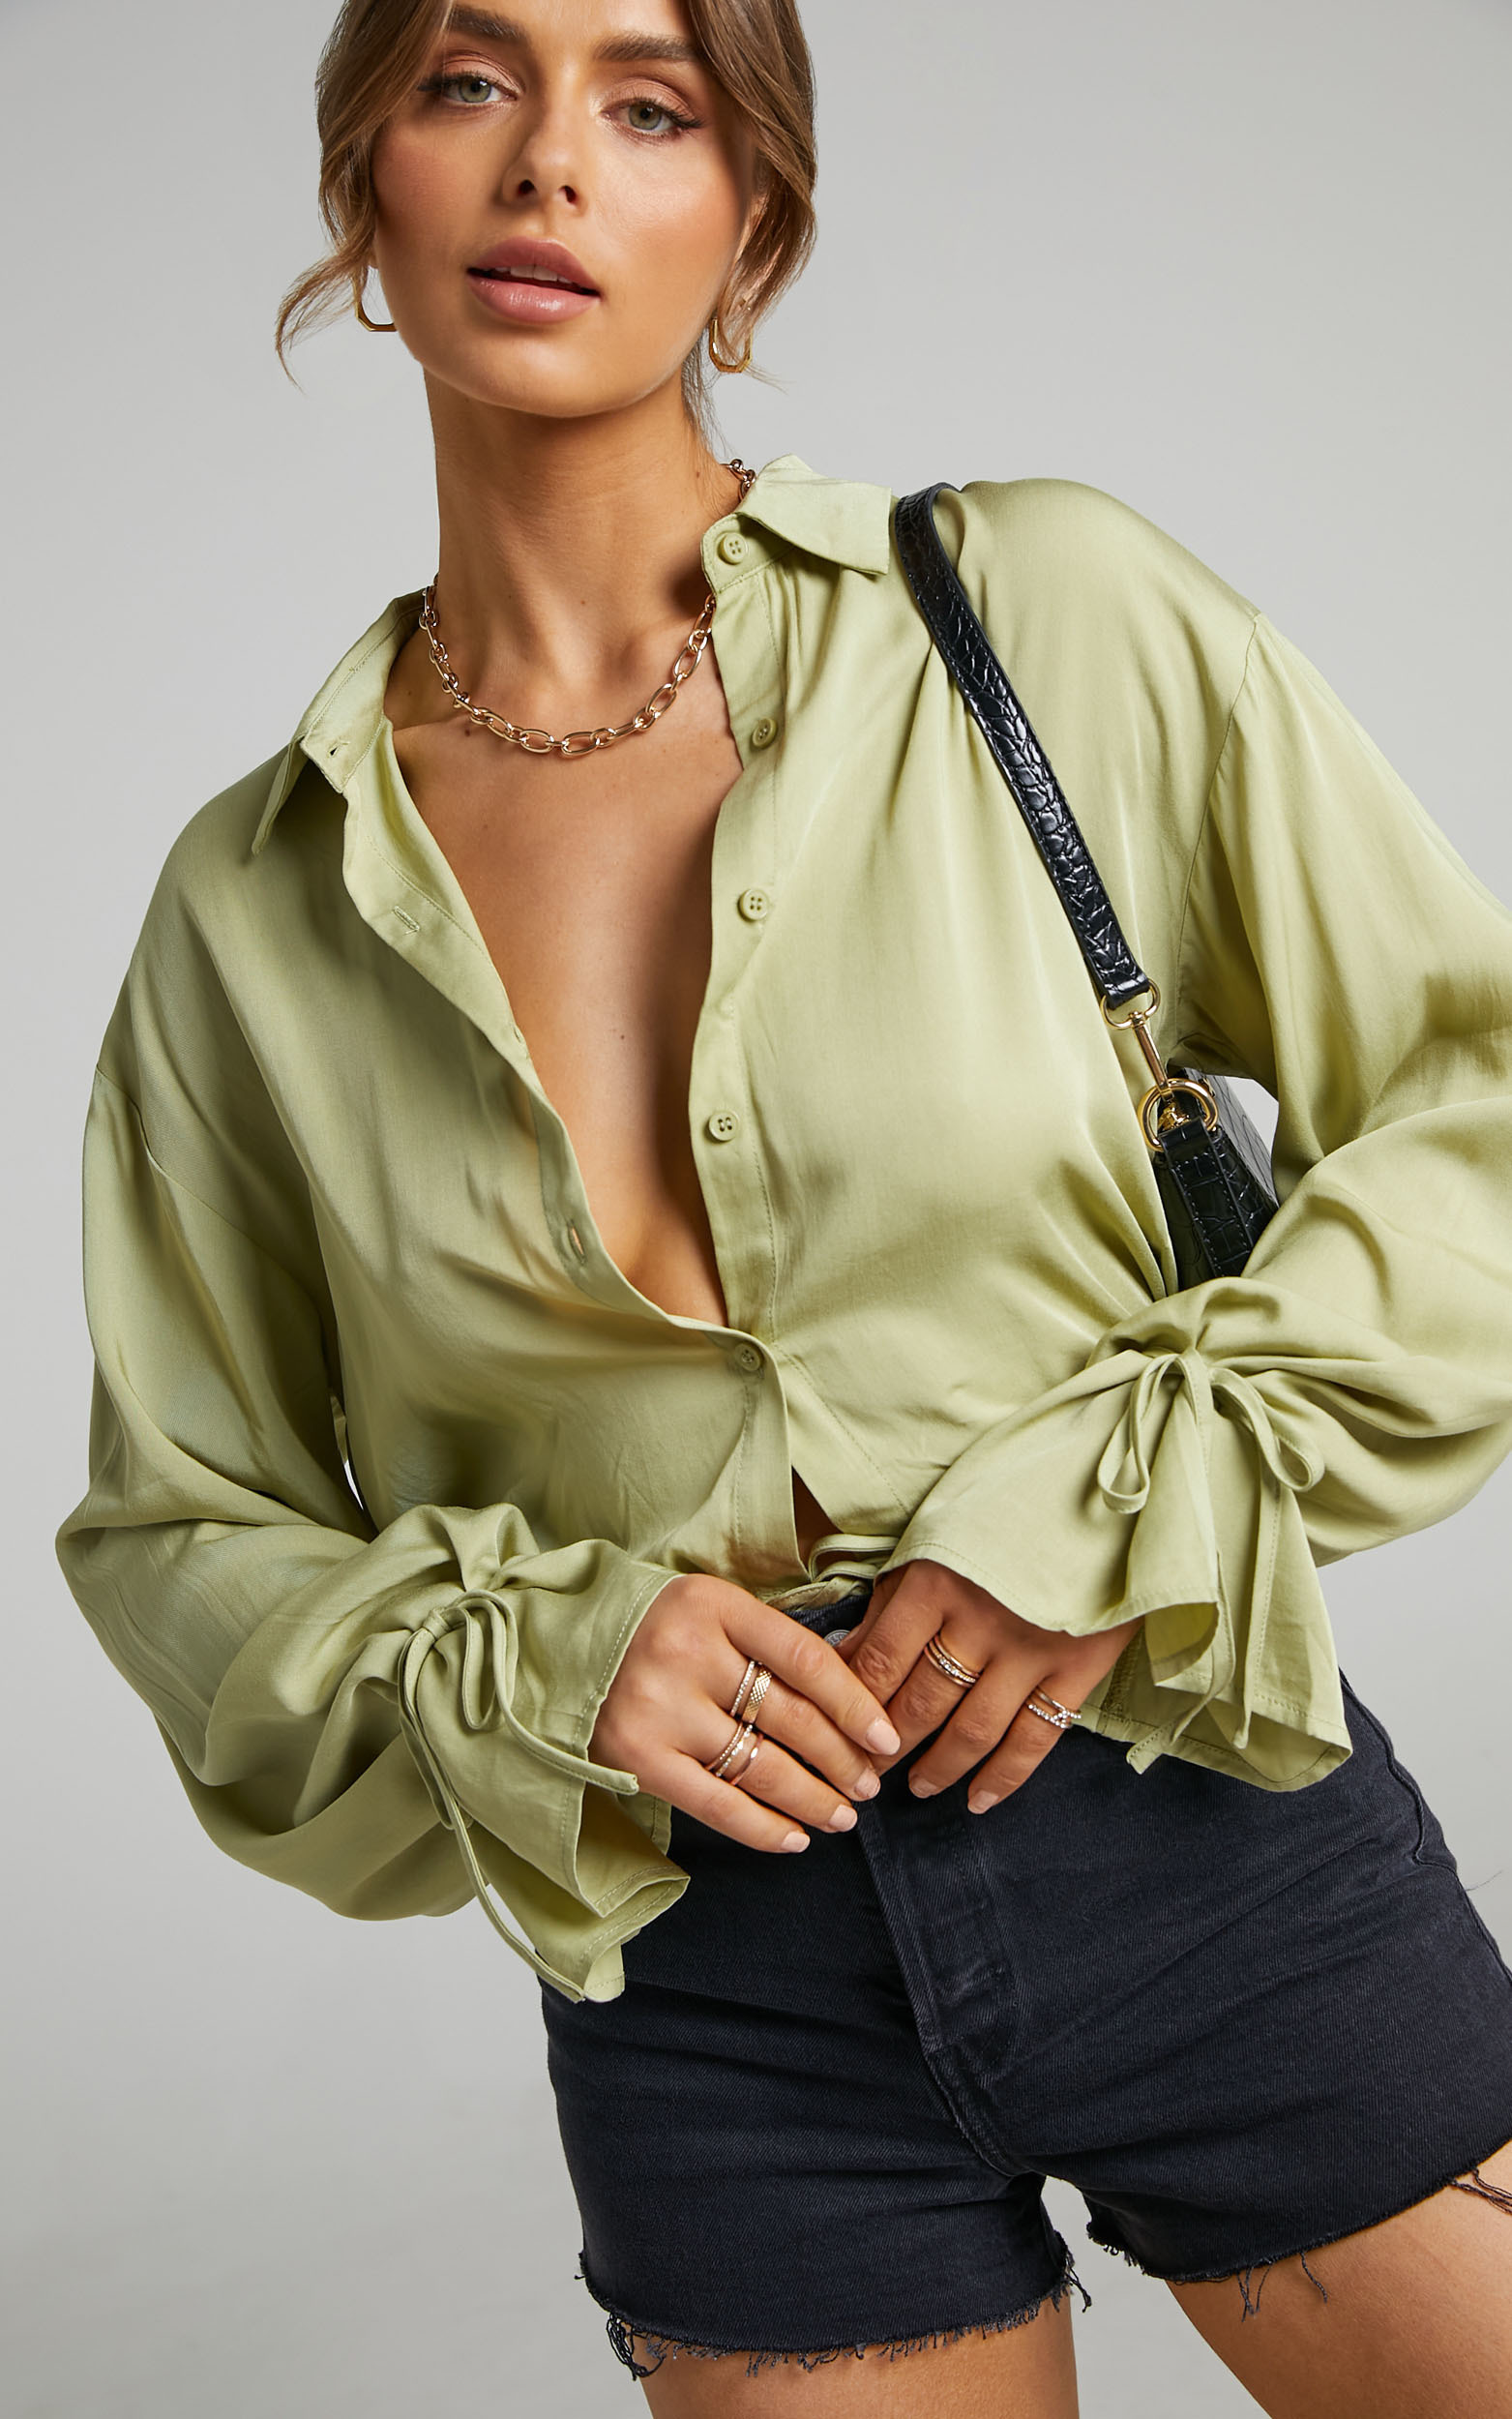 Wanda Button up Shirt in Green - 06, GRN2, hi-res image number null